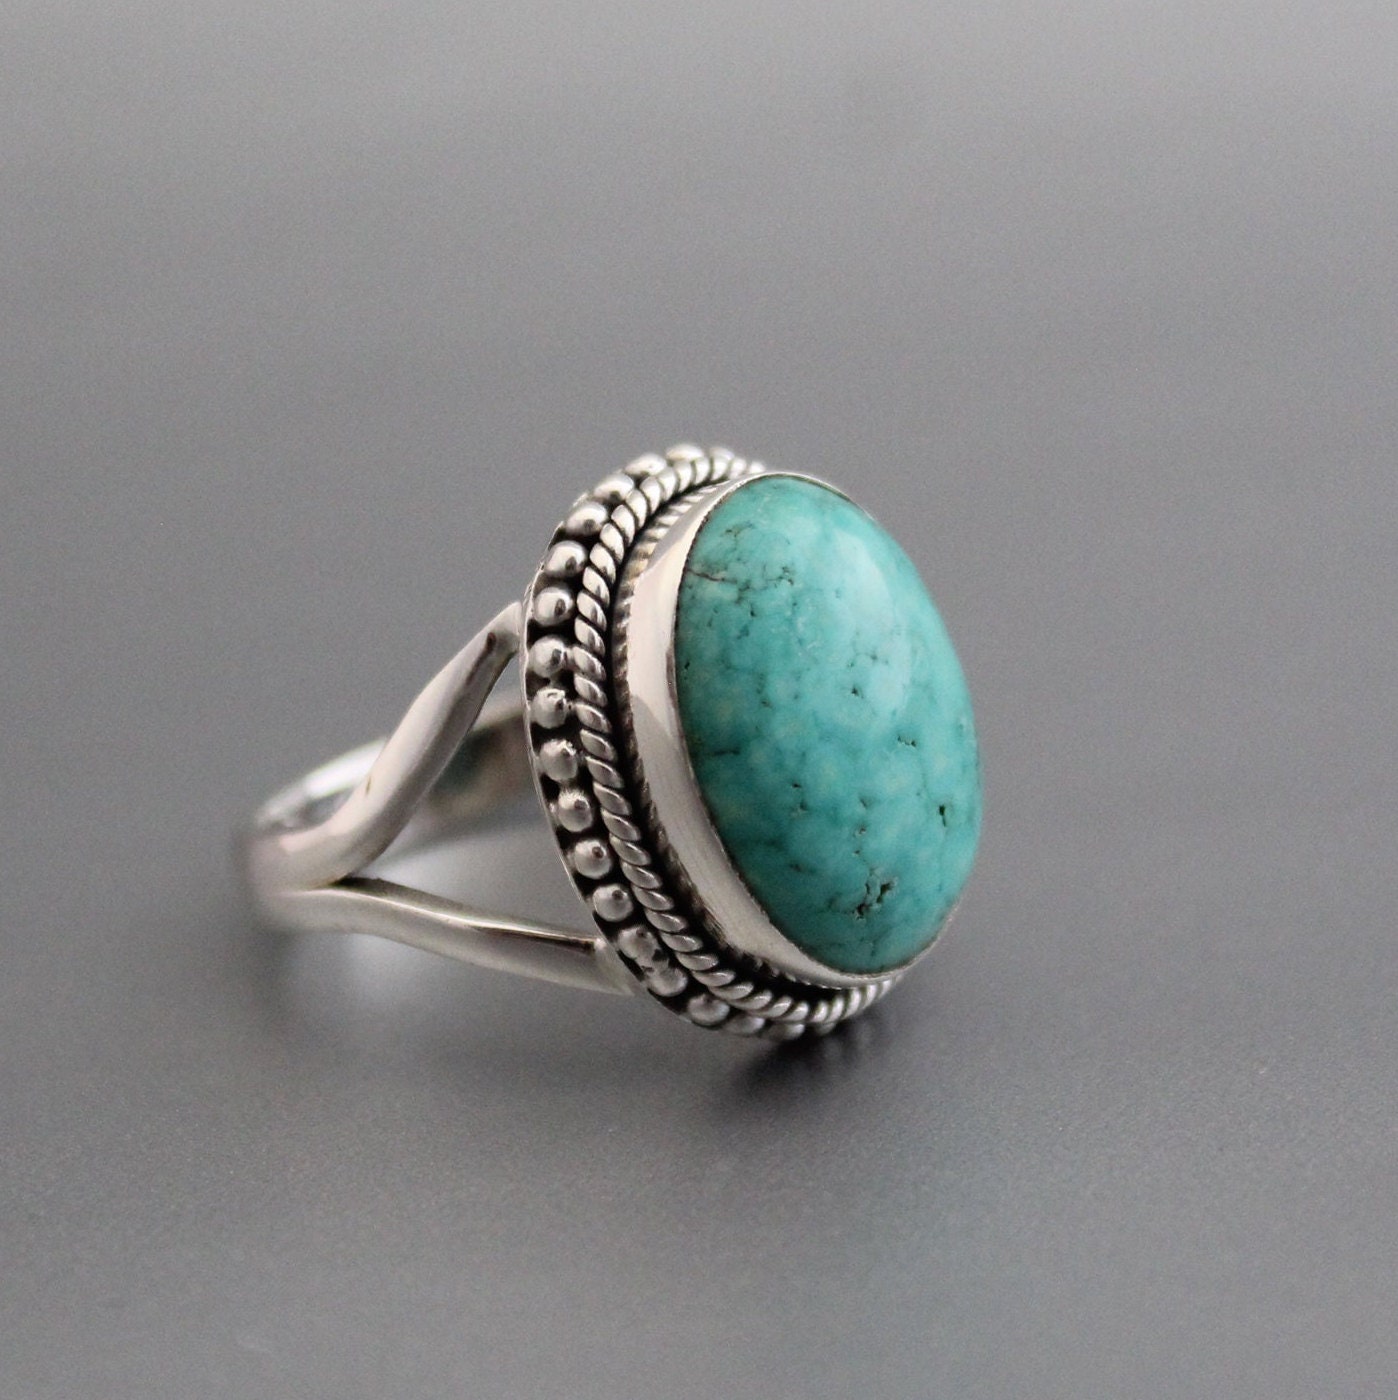 Buy Sterling Silver Bali Style Genuine Turquoise Ring, Boho Ring, Silver  Ring, Statement Ring Online in India - Etsy